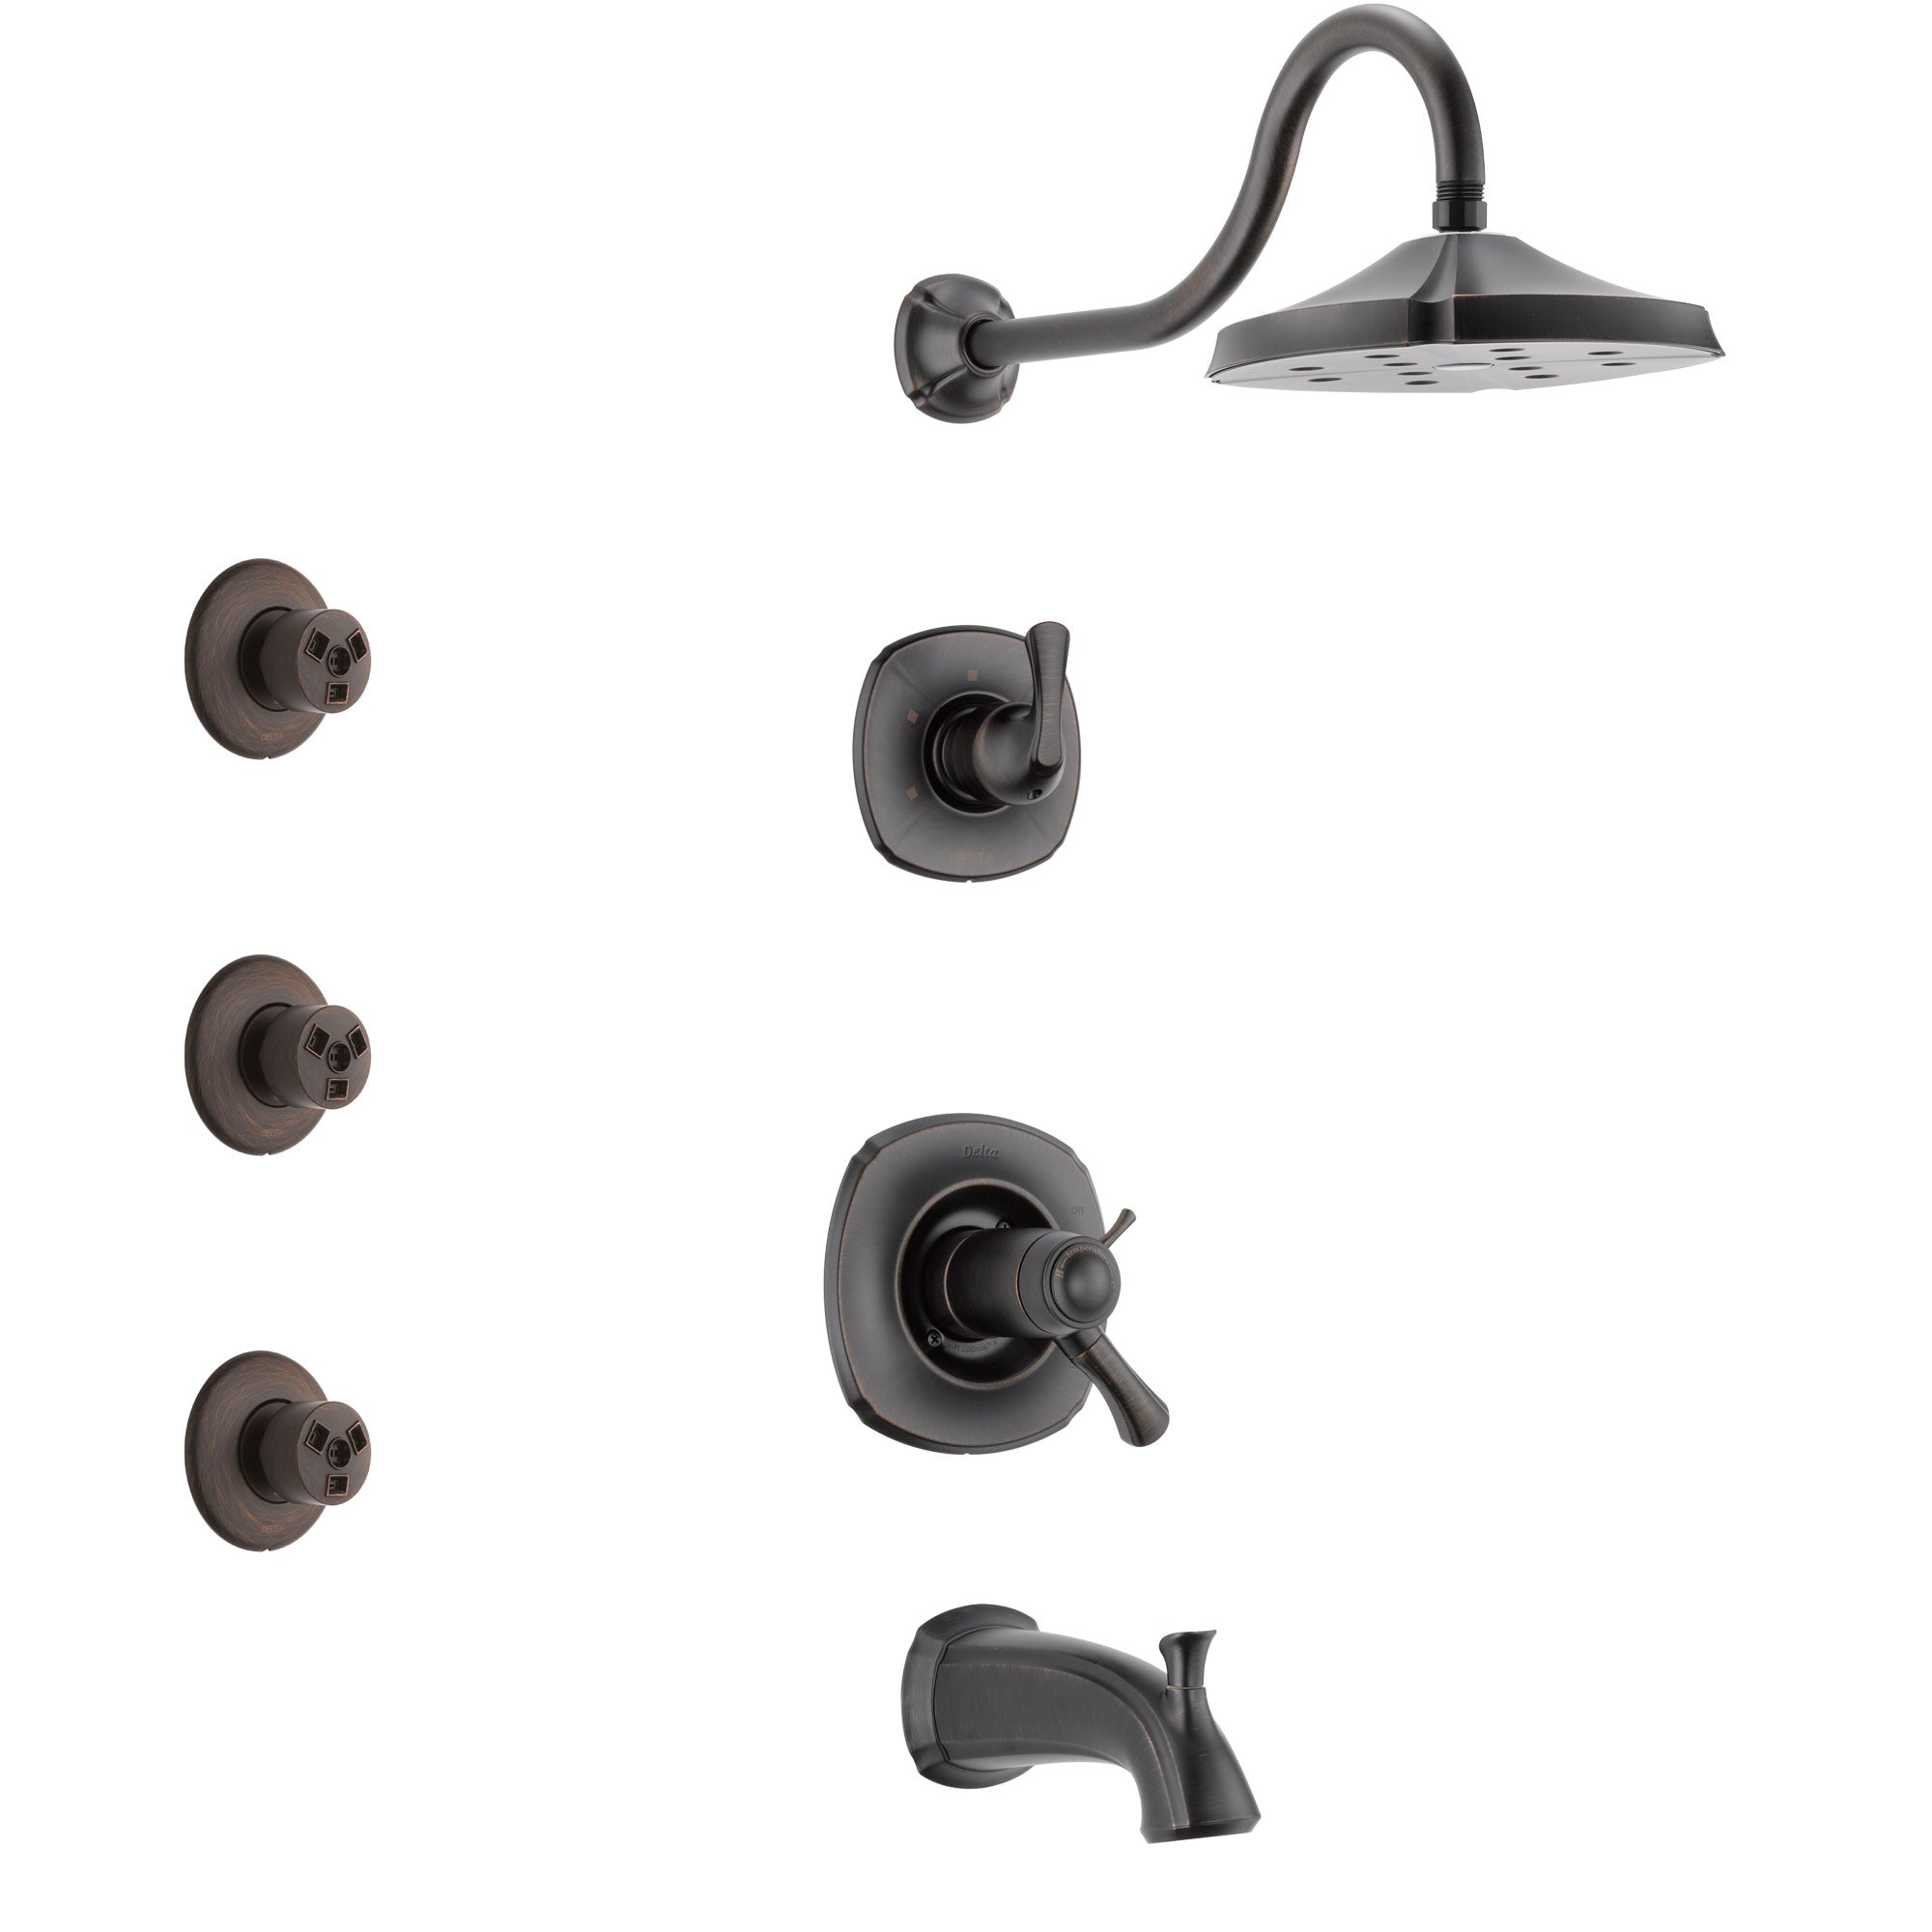 Delta Addison Venetian Bronze Tub and Shower System with Dual Thermostatic Control Handle, Diverter, Showerhead, and 3 Body Sprays SS17T4921RB2